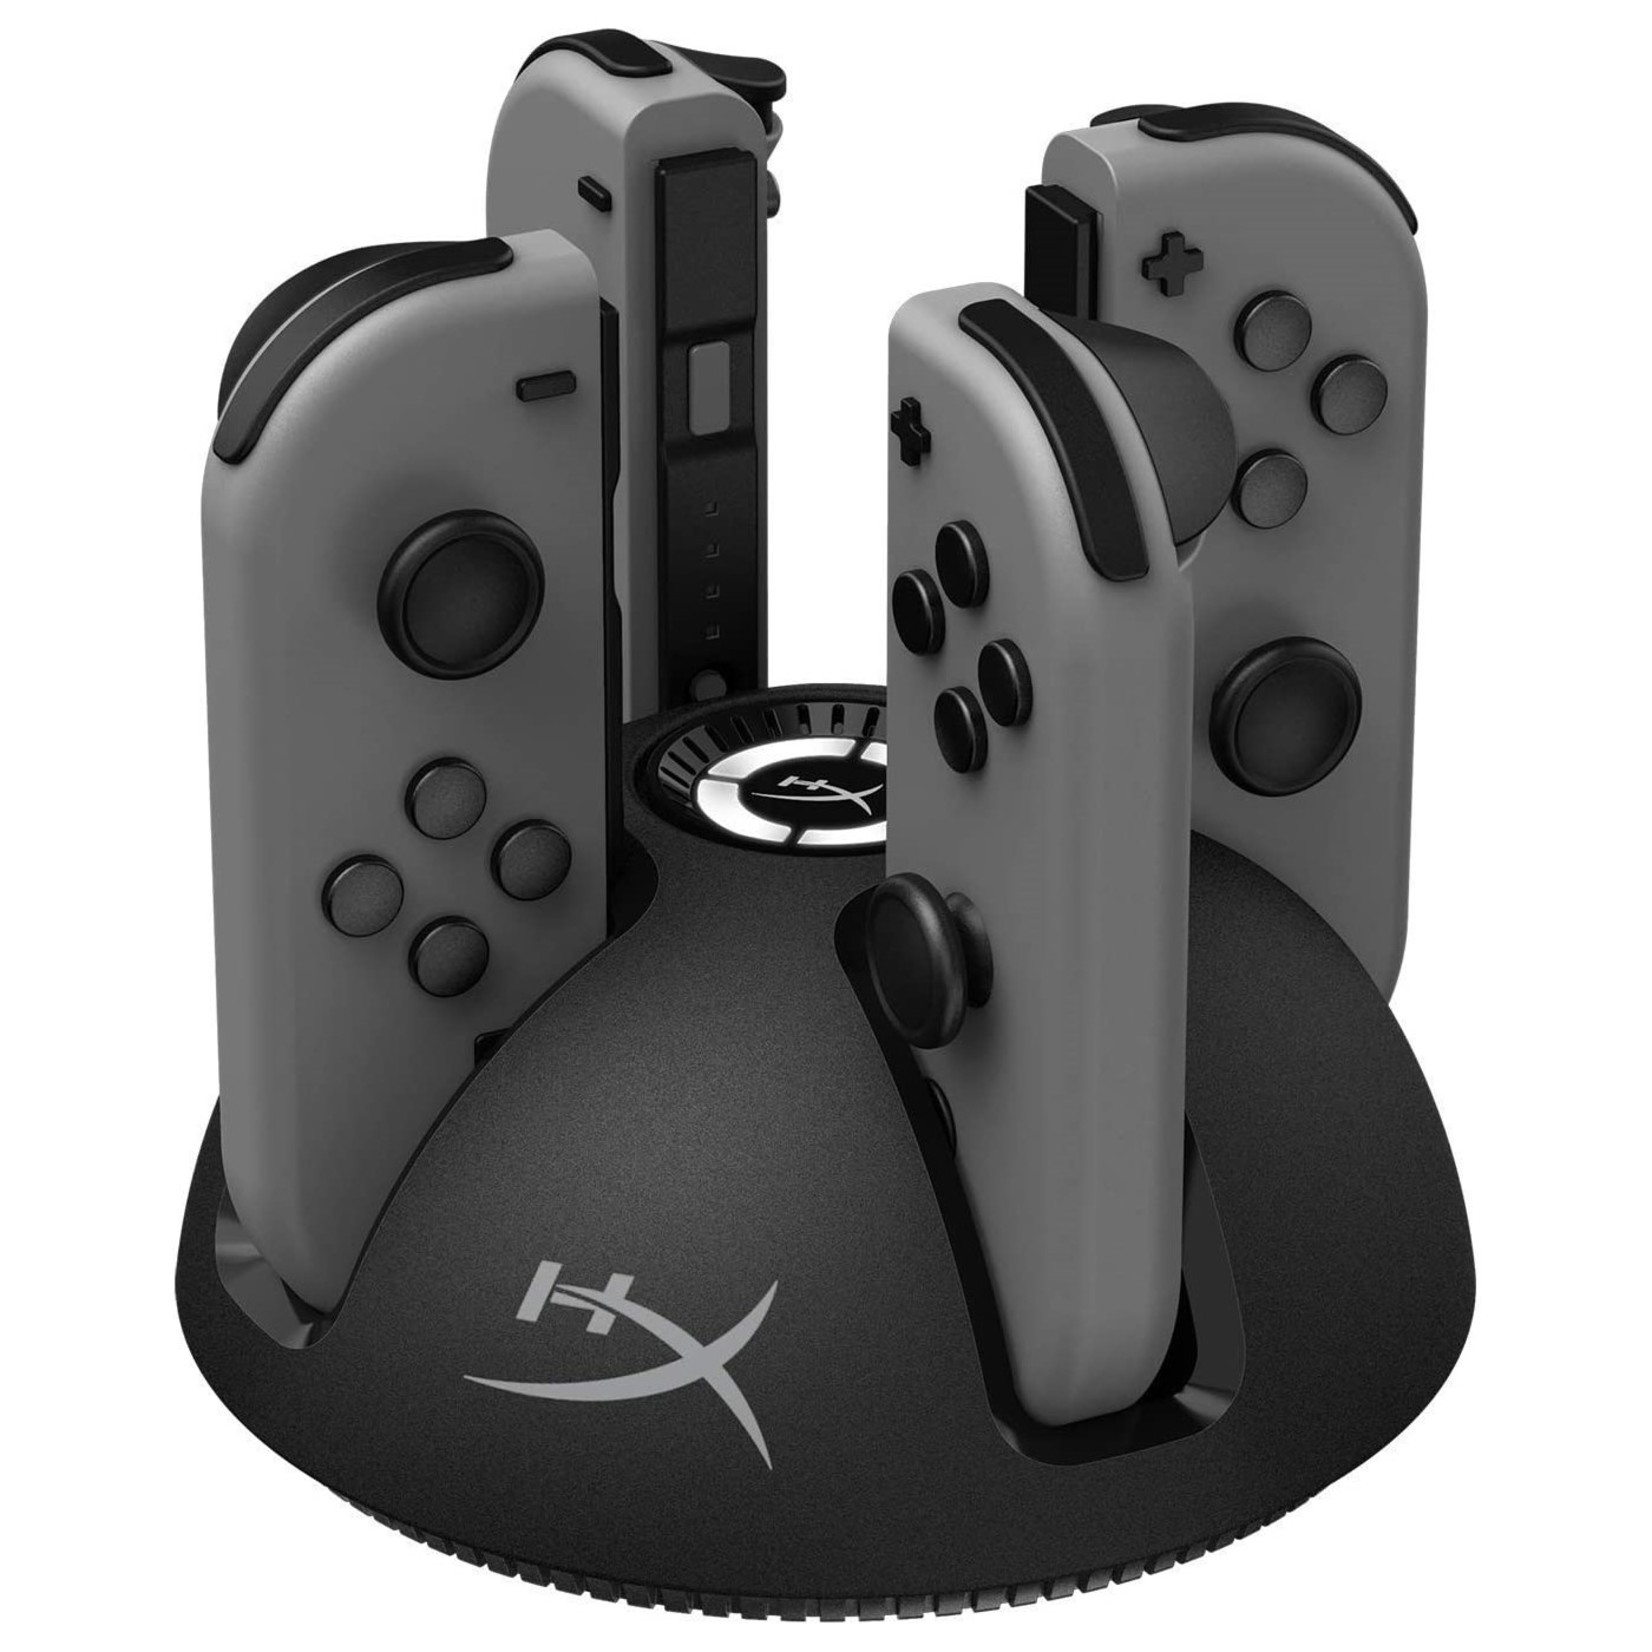 HyperX ChargePlay Quad - Joy-Con Charging Station for